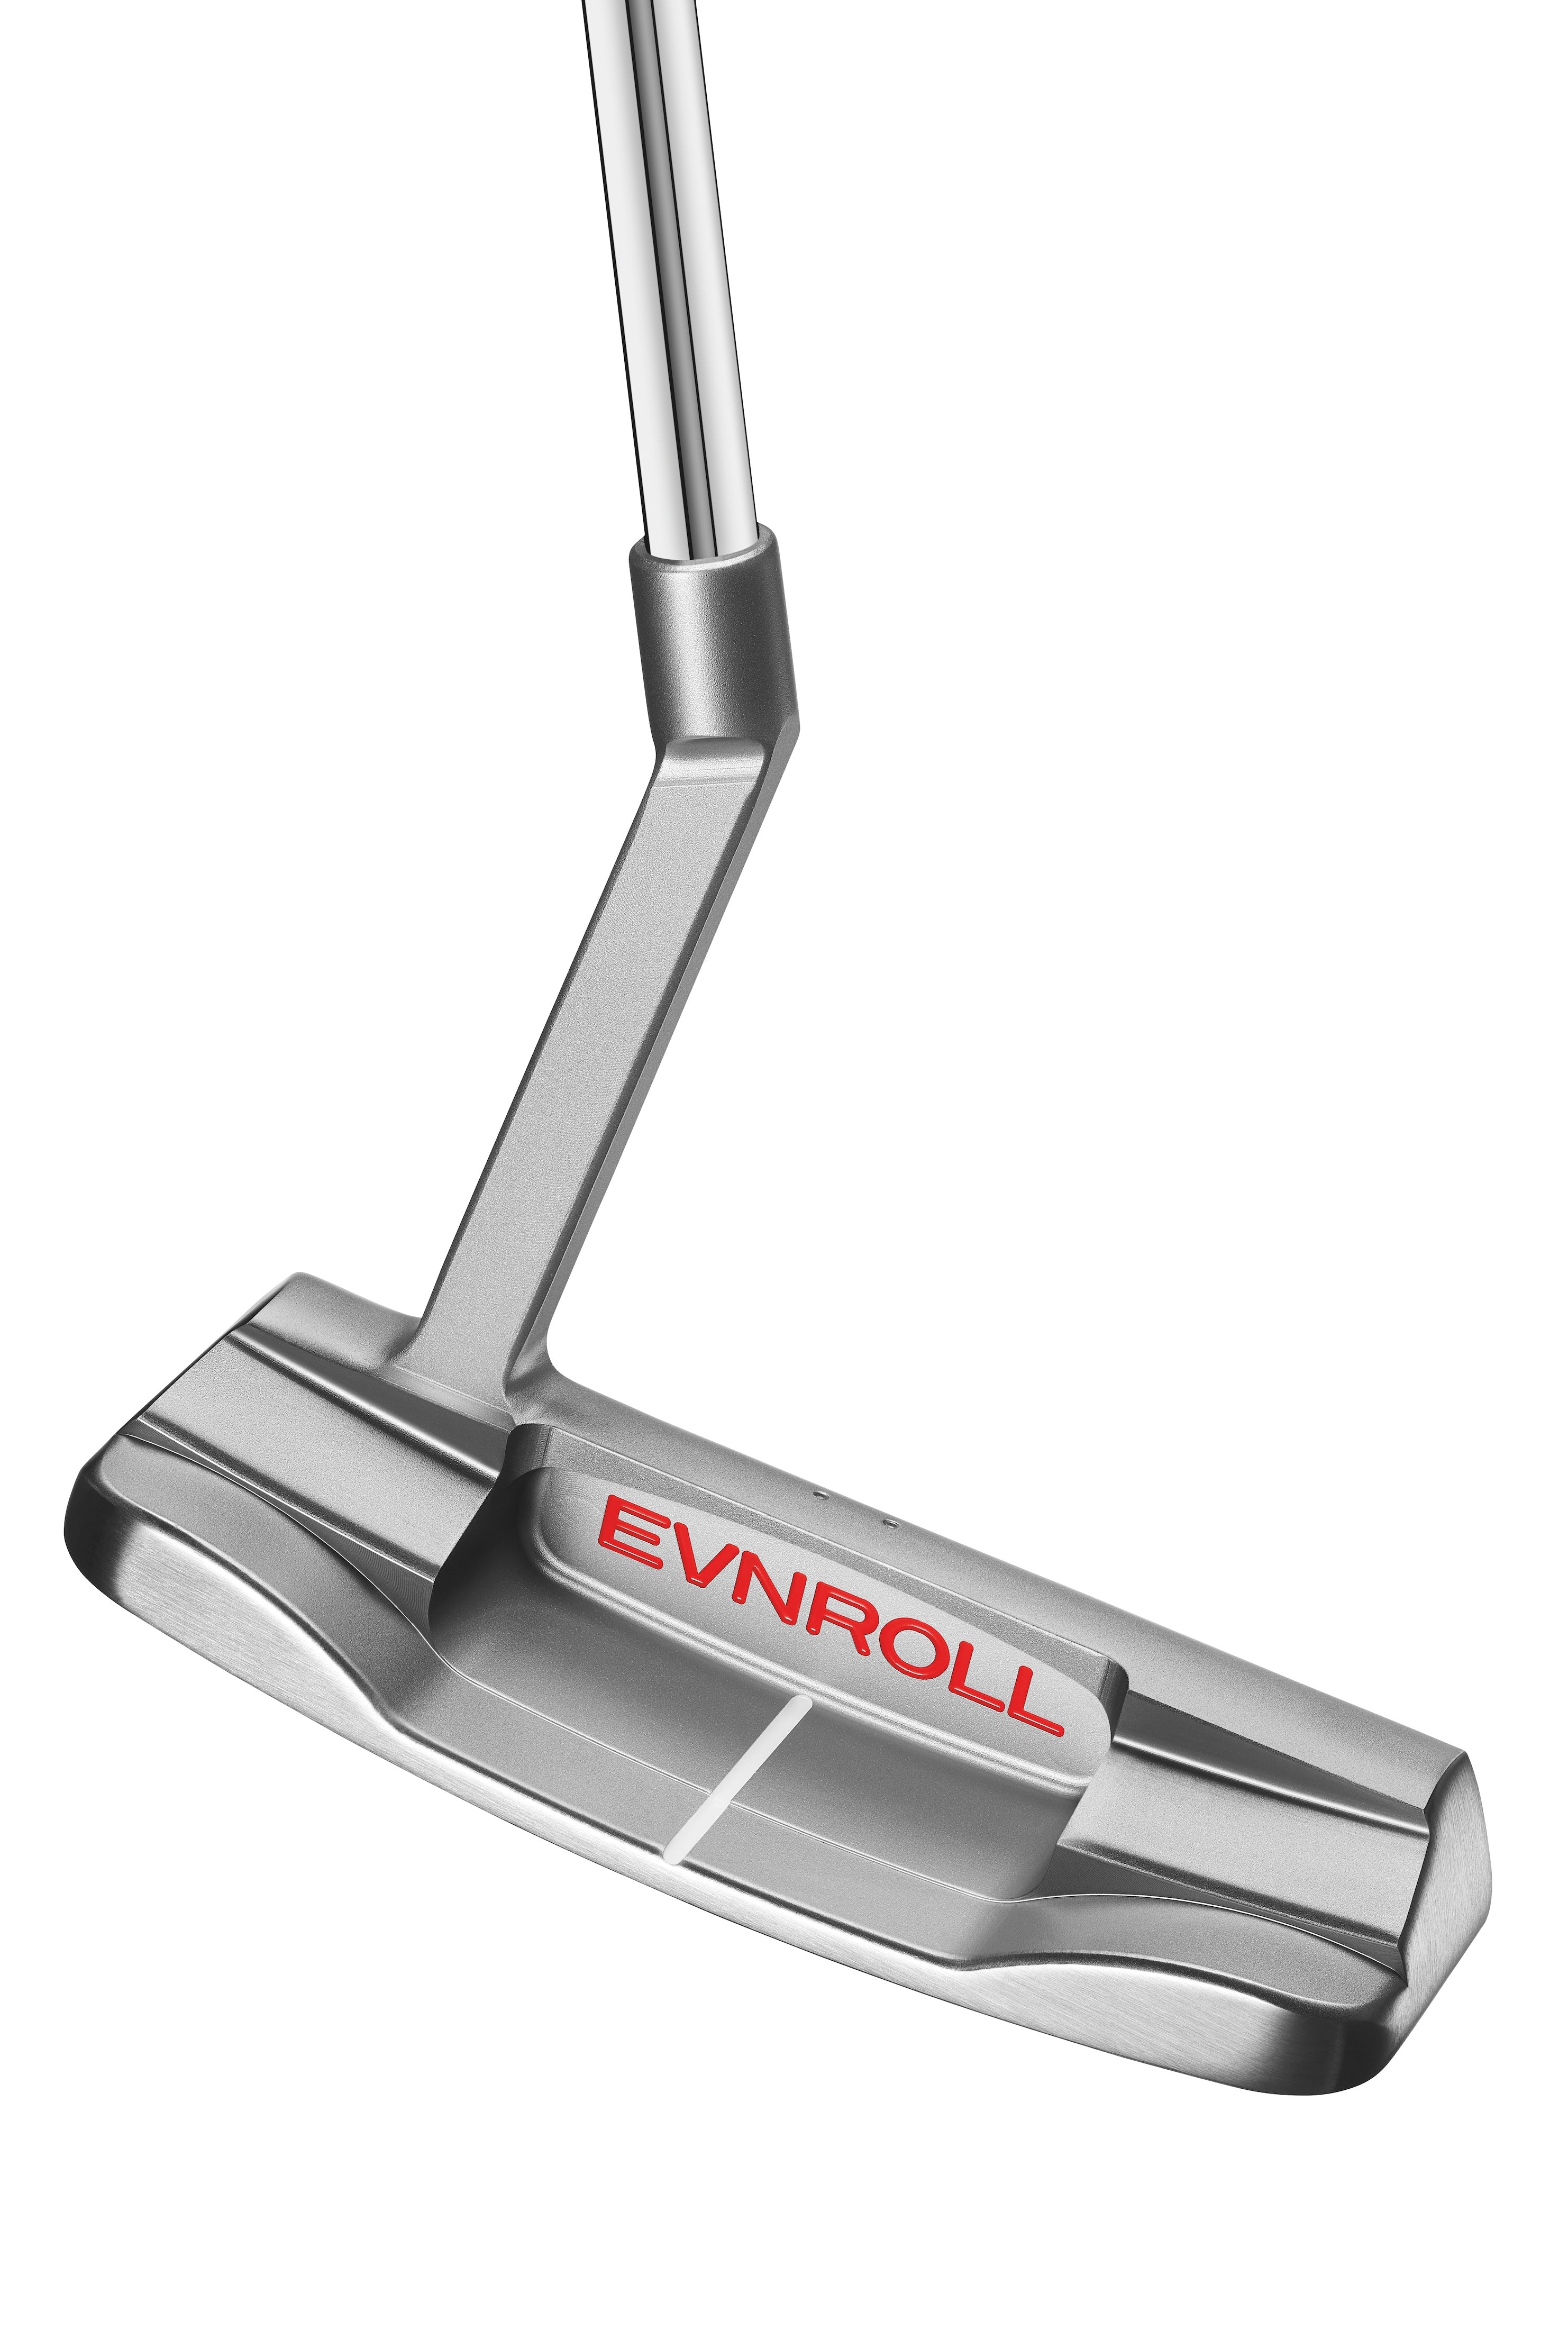 Zero Dispersion Evnroll Putters are Admired Among Golfers at PGA Merchandise Show 2020